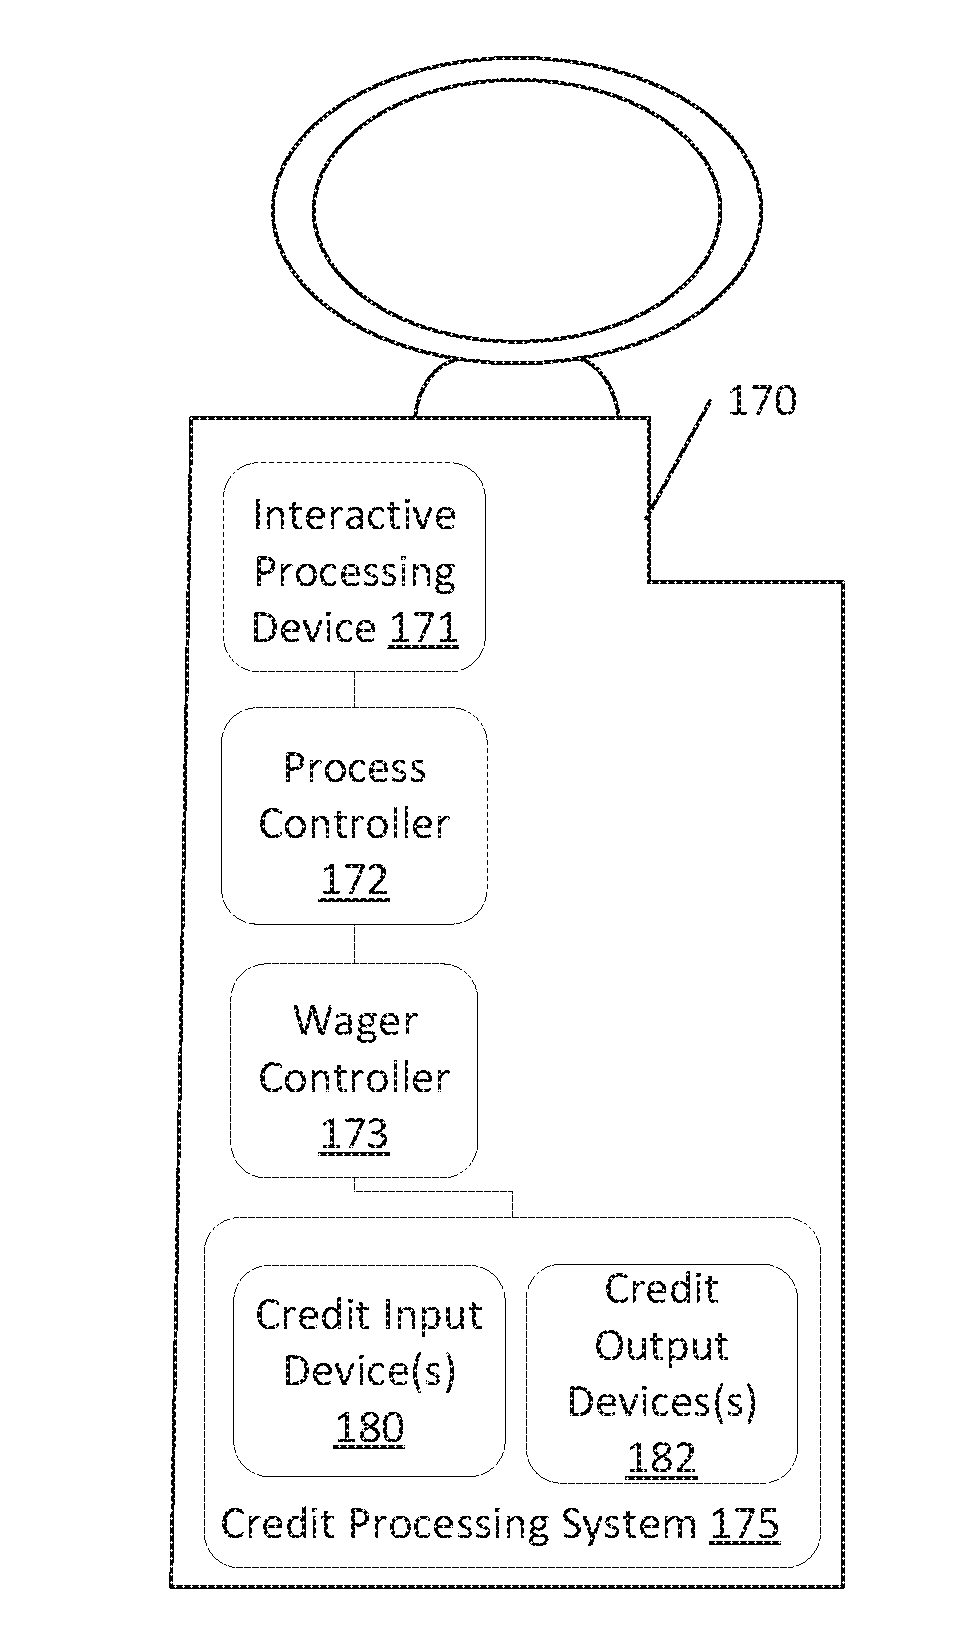 Gwc production monitoring interleaved wagering system